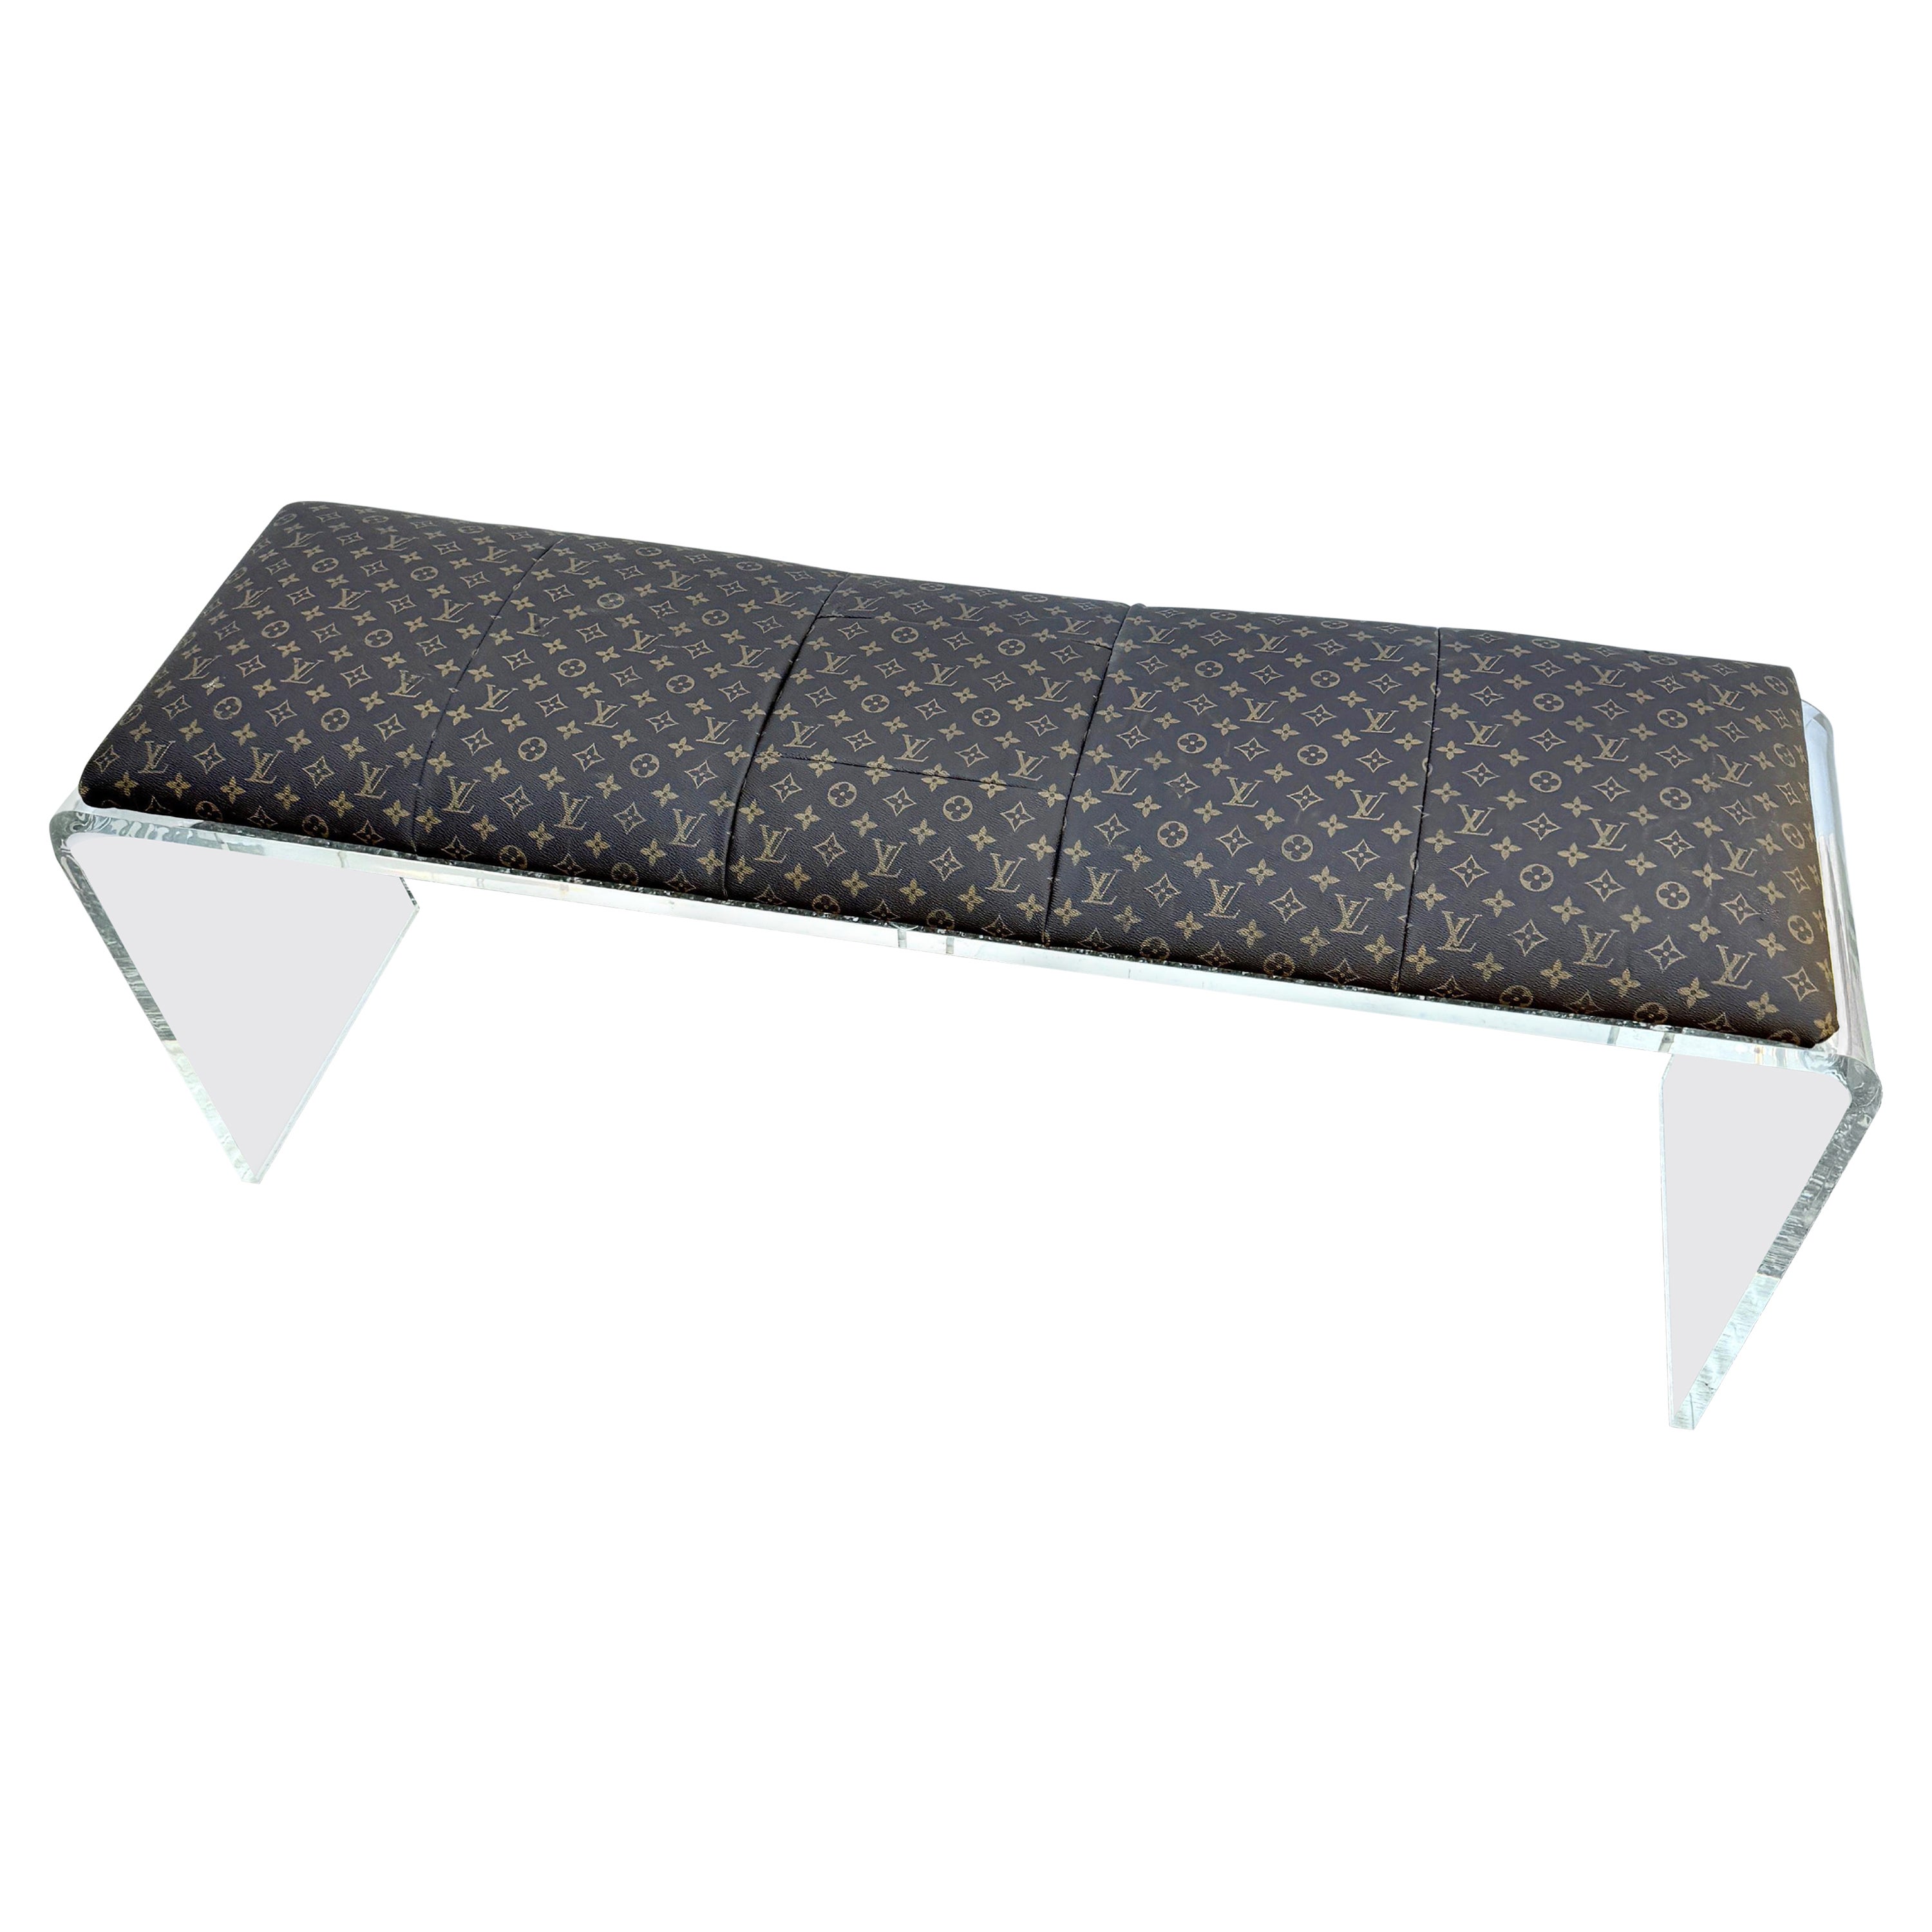 Lucite Bench Upholstered in Louis Vuitton Monogram Fabric  For Sale